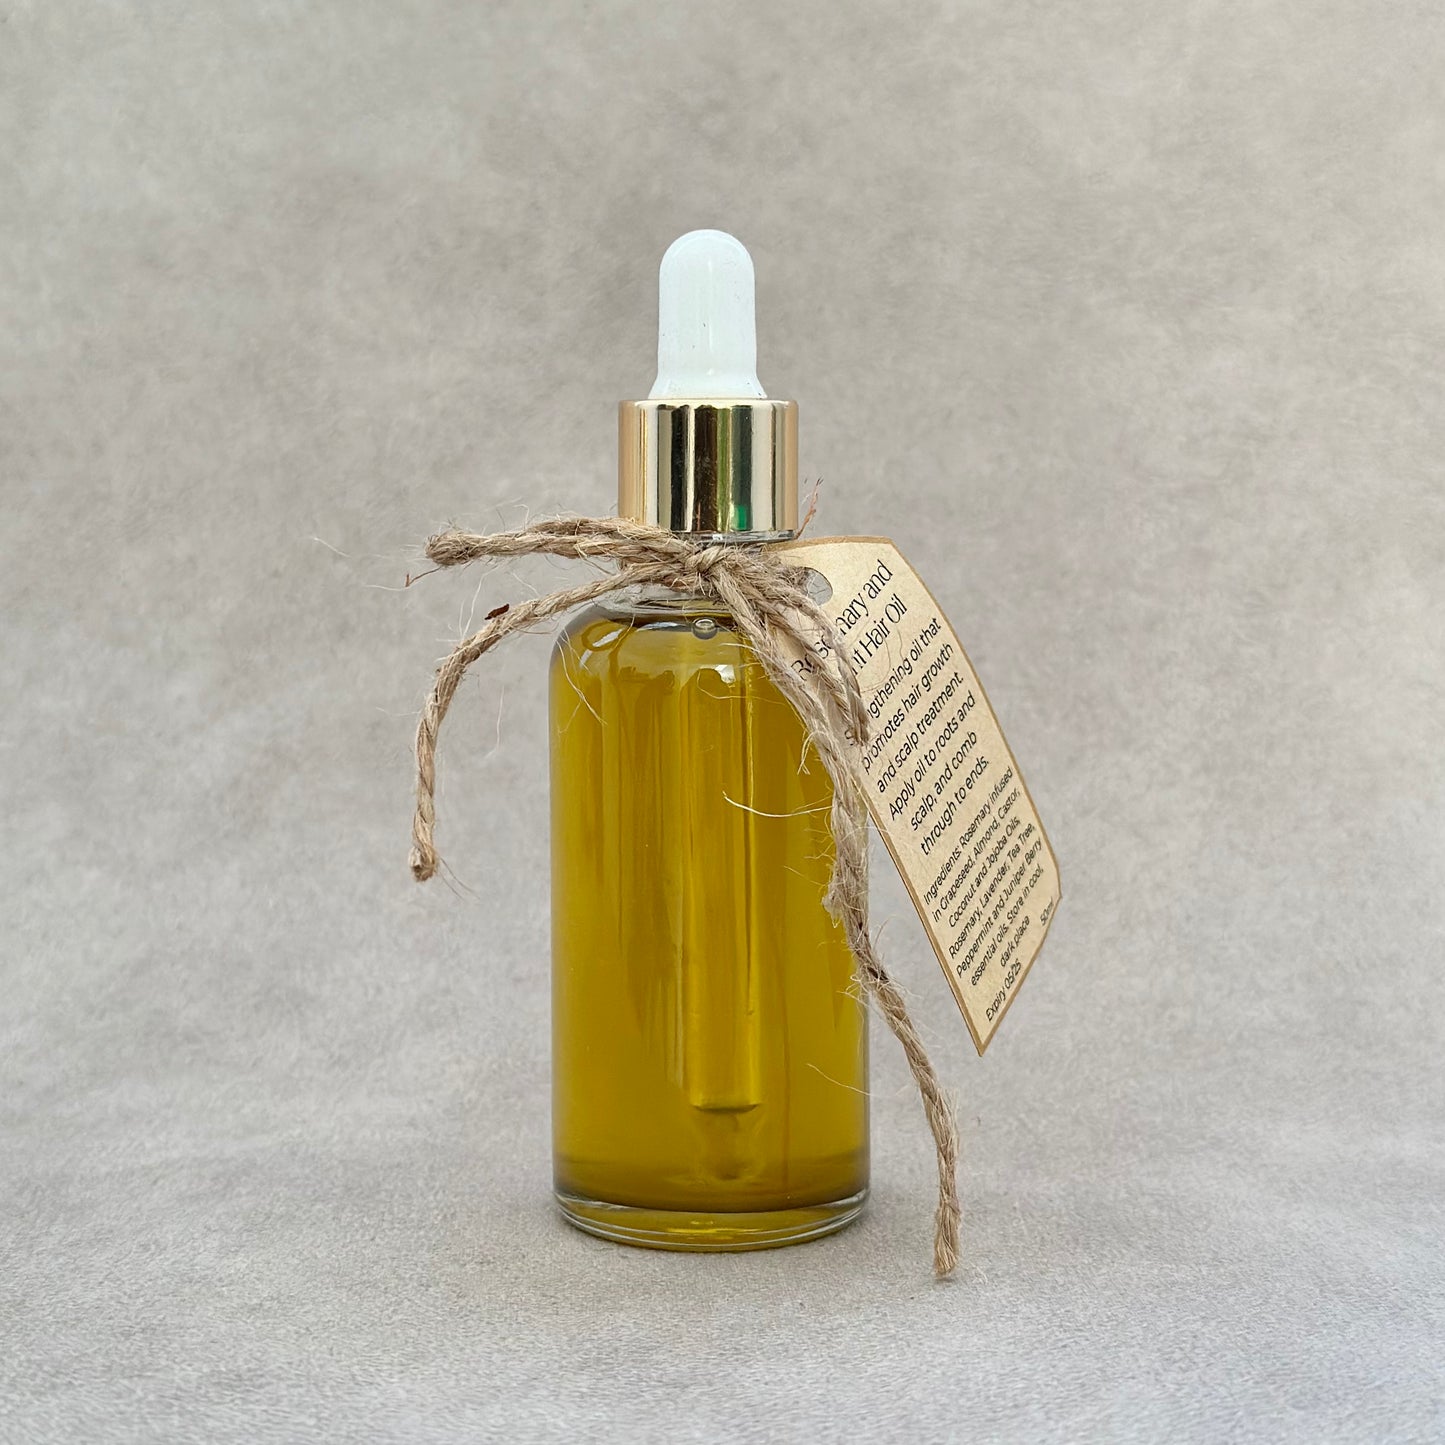 Rosemary and Mint Hair Oil